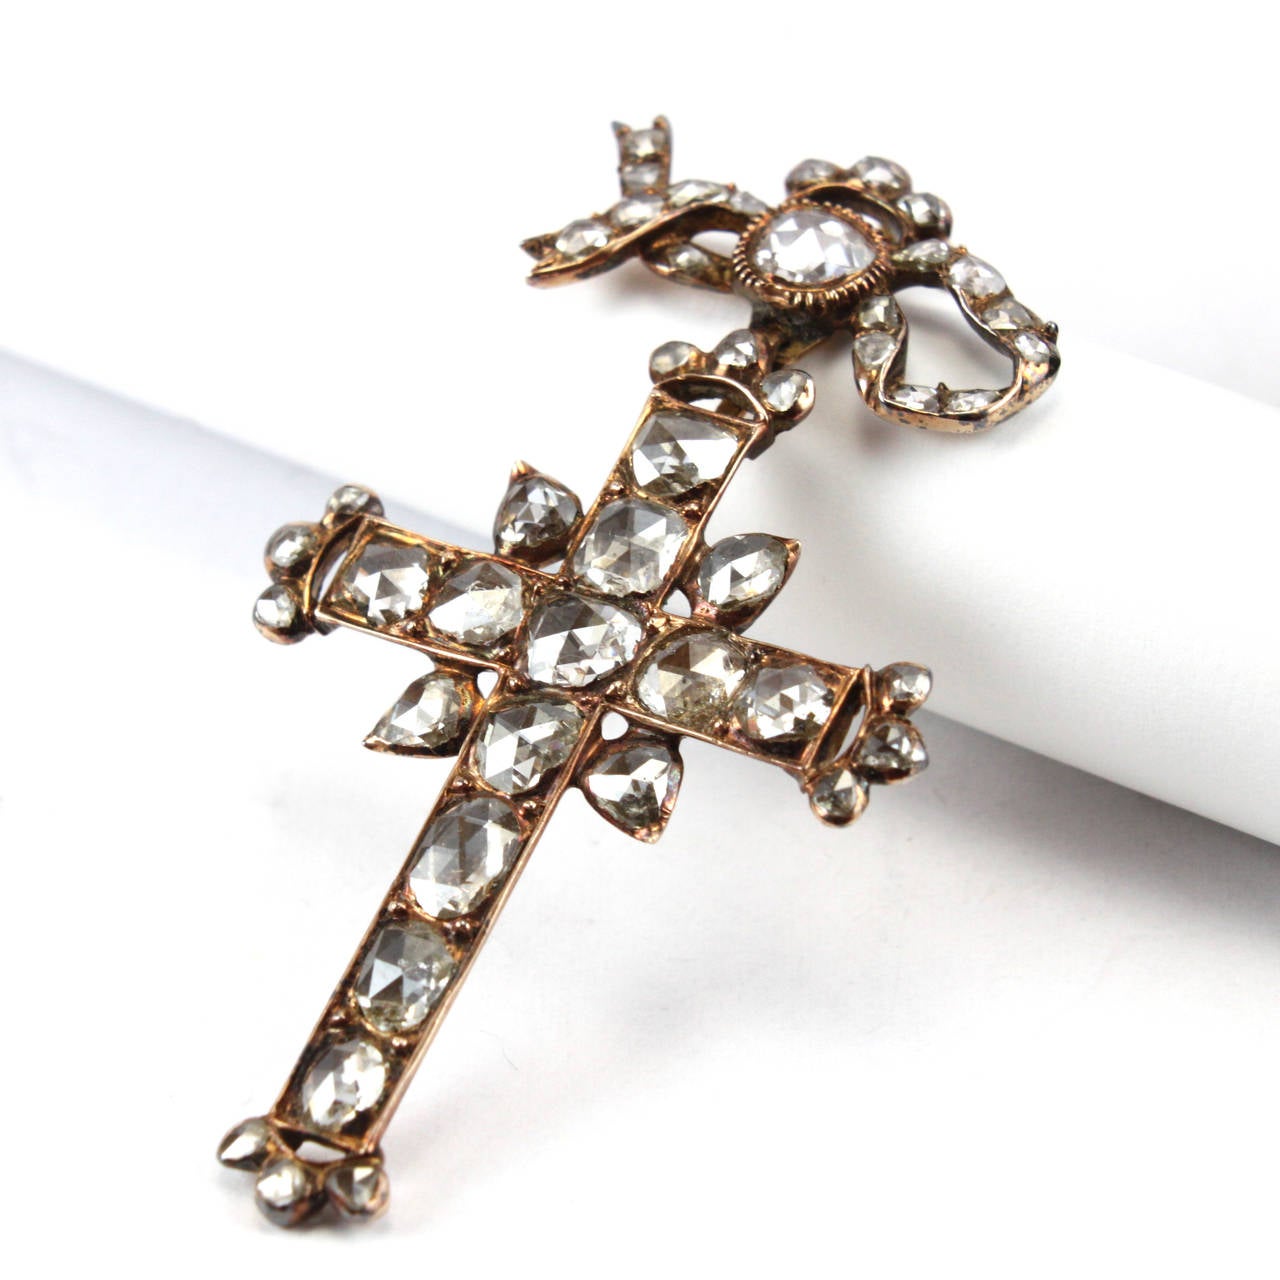 A rare antique cross pendant, 1830s, with rosecut diamonds, circa 3 carats, in yellow gold.

This is a beautiful antique piece in an excellent and original condition.